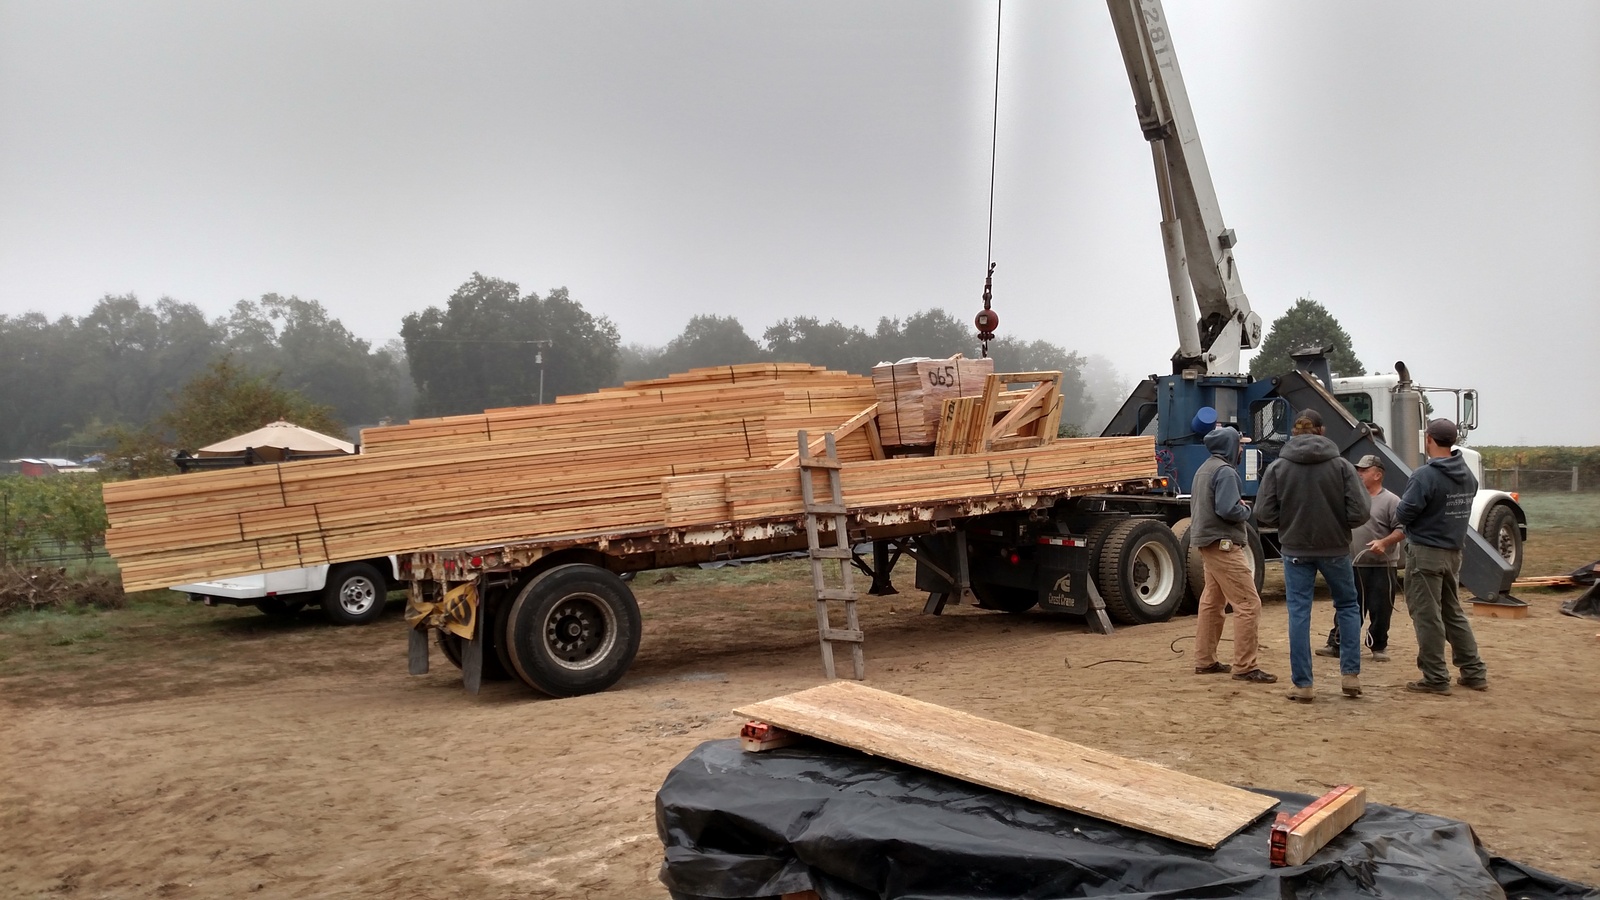 New home - roof trusses arrive